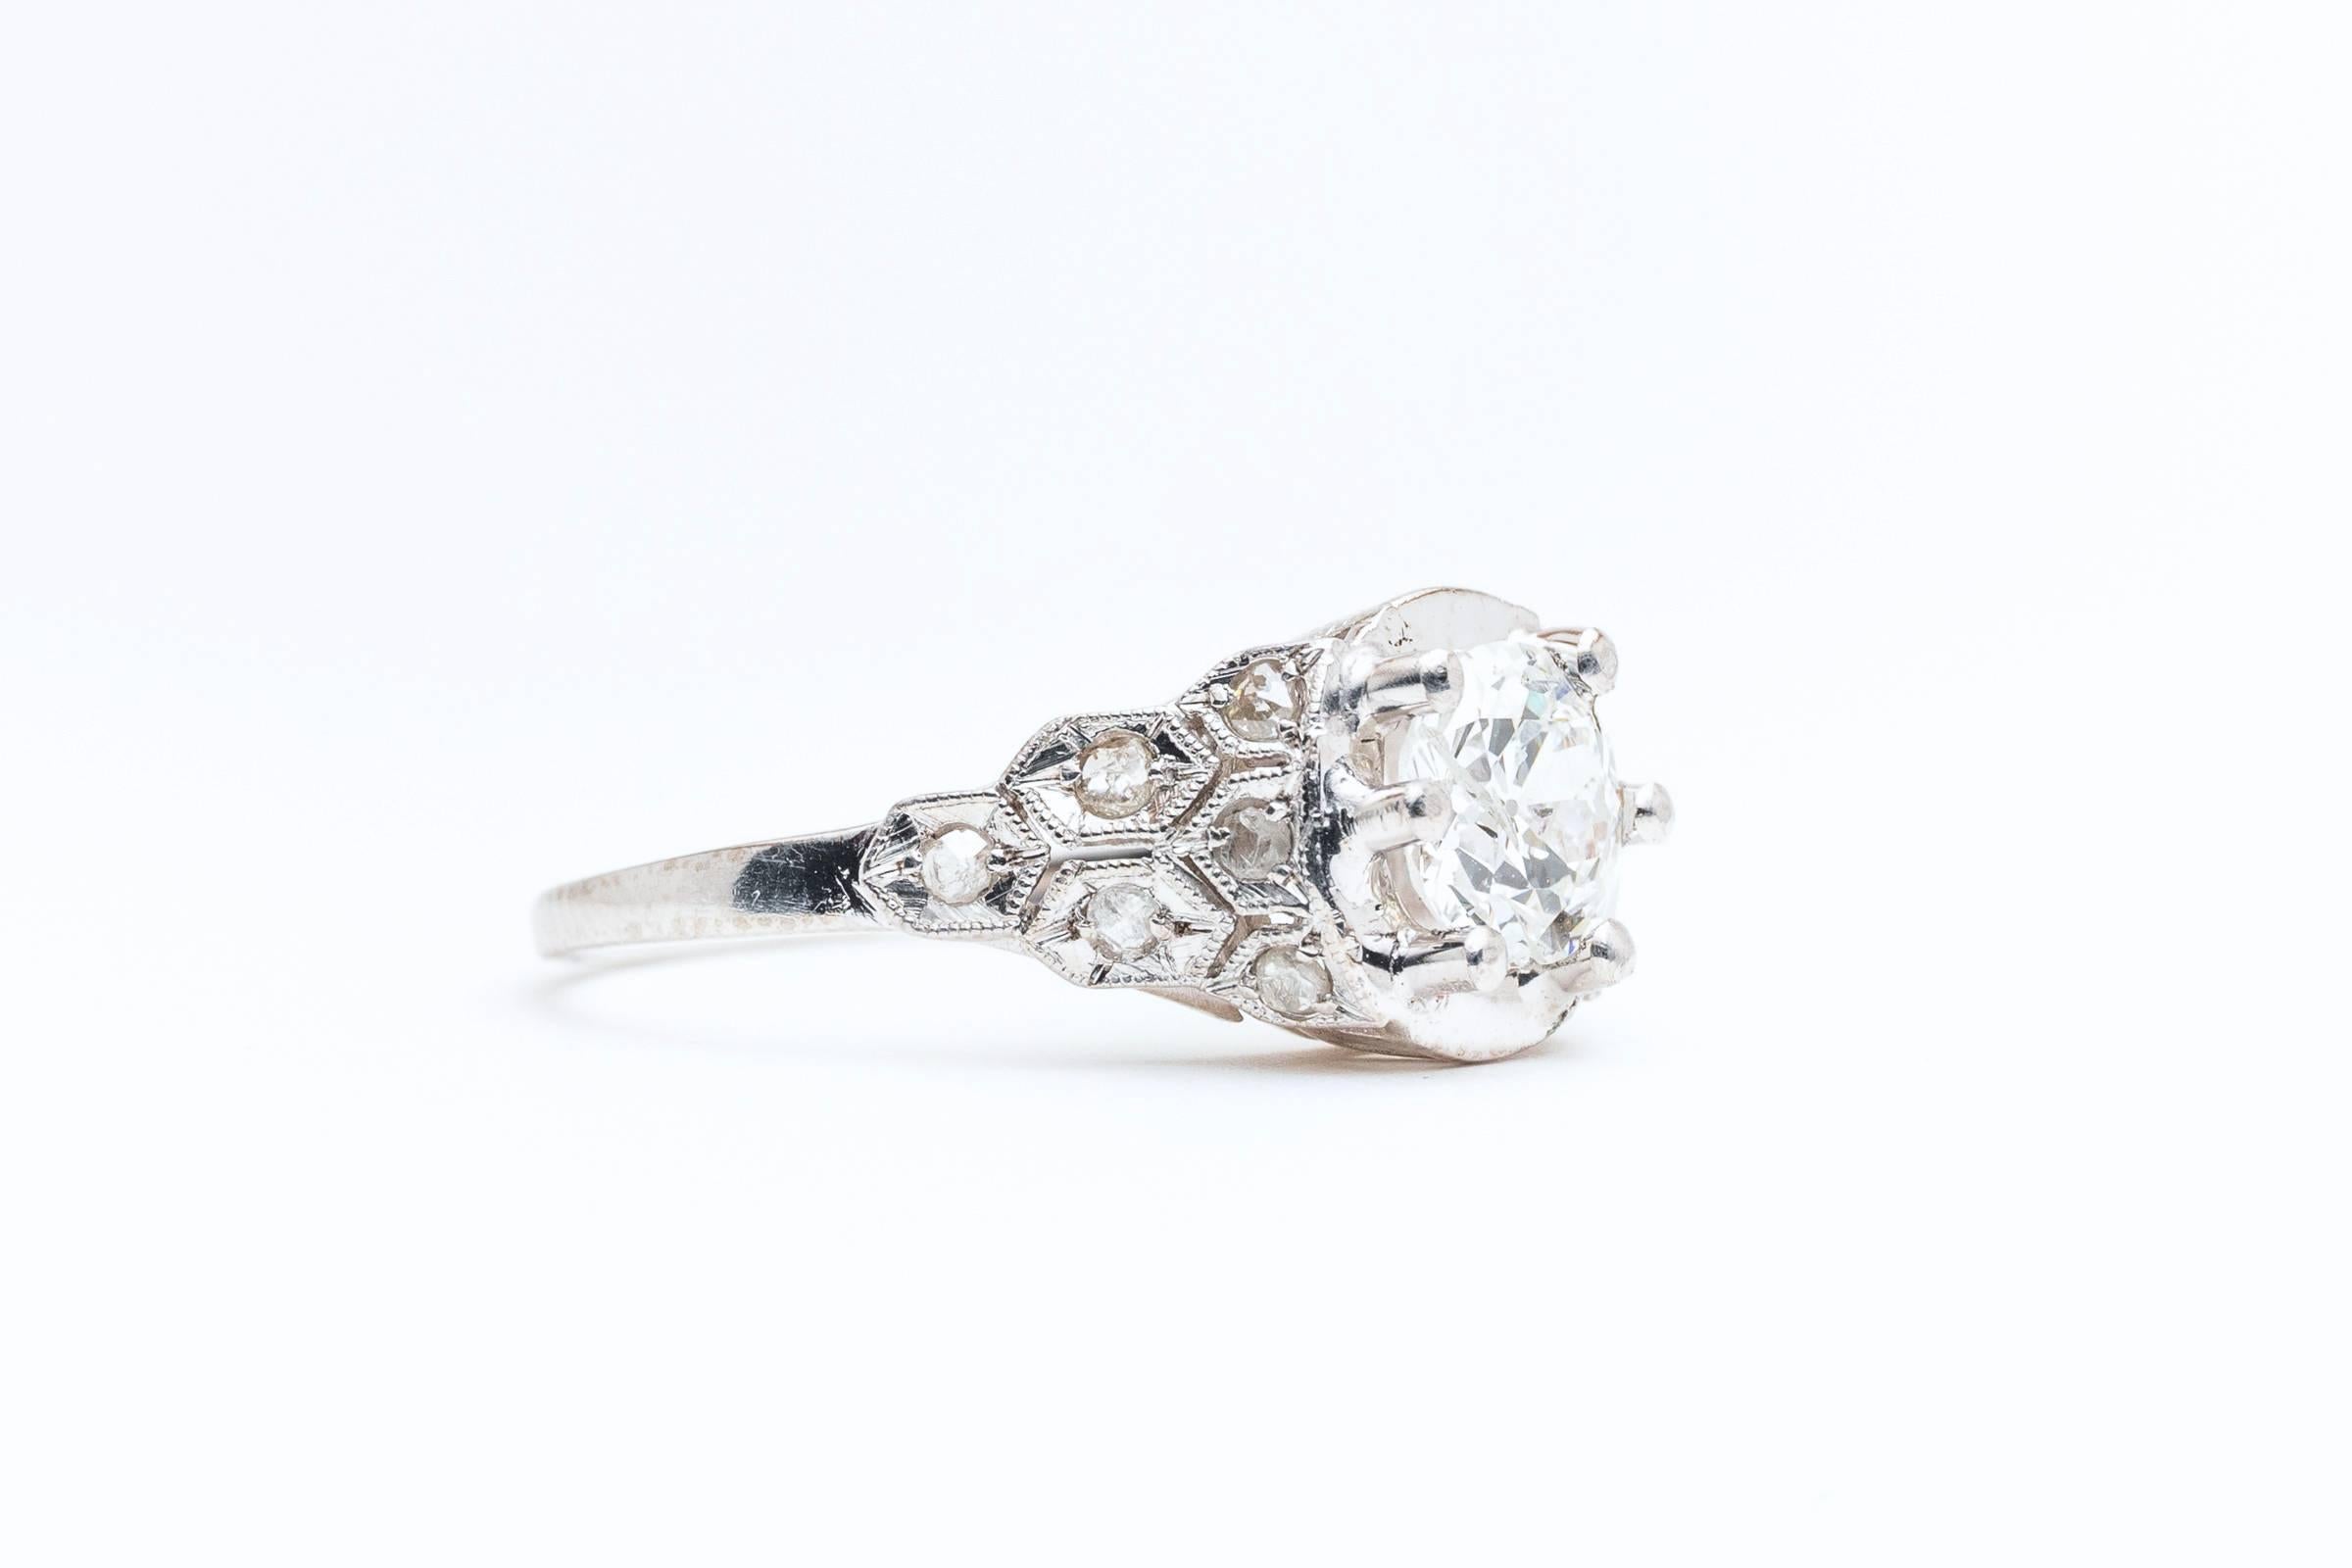 Beacon Hill Jewelers Presents:

A beautiful art deco period diamond engagement ring in luxurious platinum. Centered by a 1.15 carat old European cut diamonds of gorgeous D/E colorless color, this ring features accenting rose cut diamonds.

Of